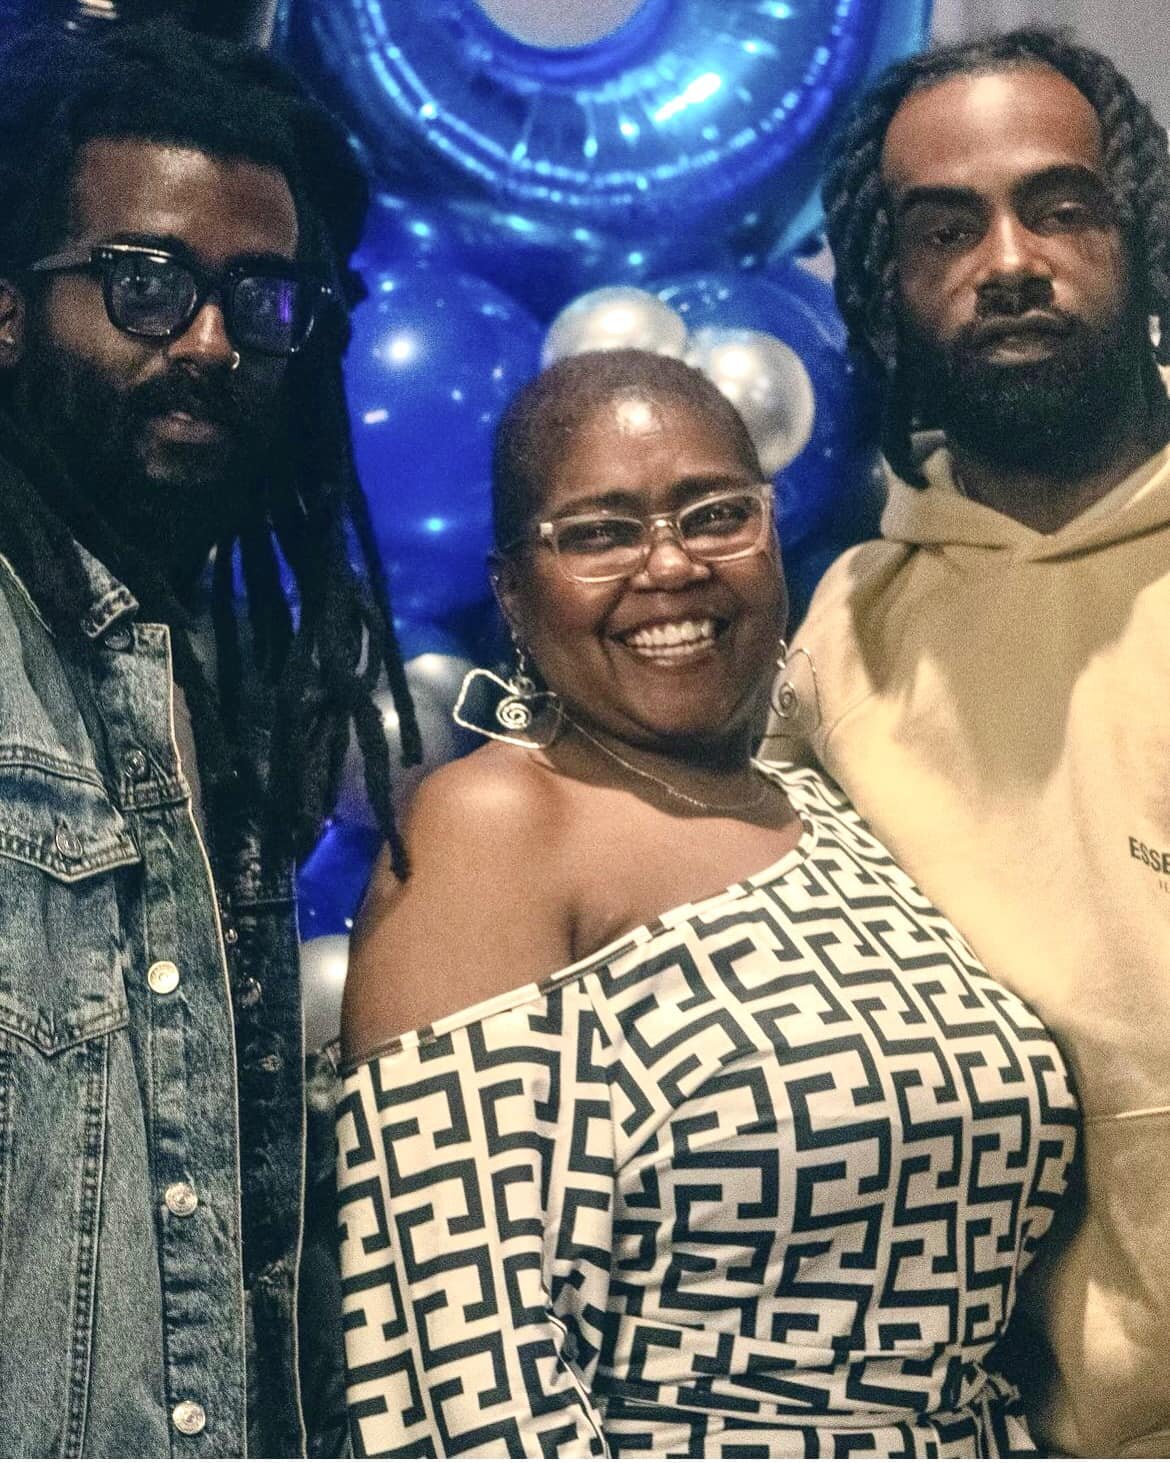 This woman here! We absolutely adore you! You are such a light in our lives. We shine because of you. Shoutout to the Creator for creating you. Happy Mother&rsquo;s Day @vette0712 ! We are so grateful for you!